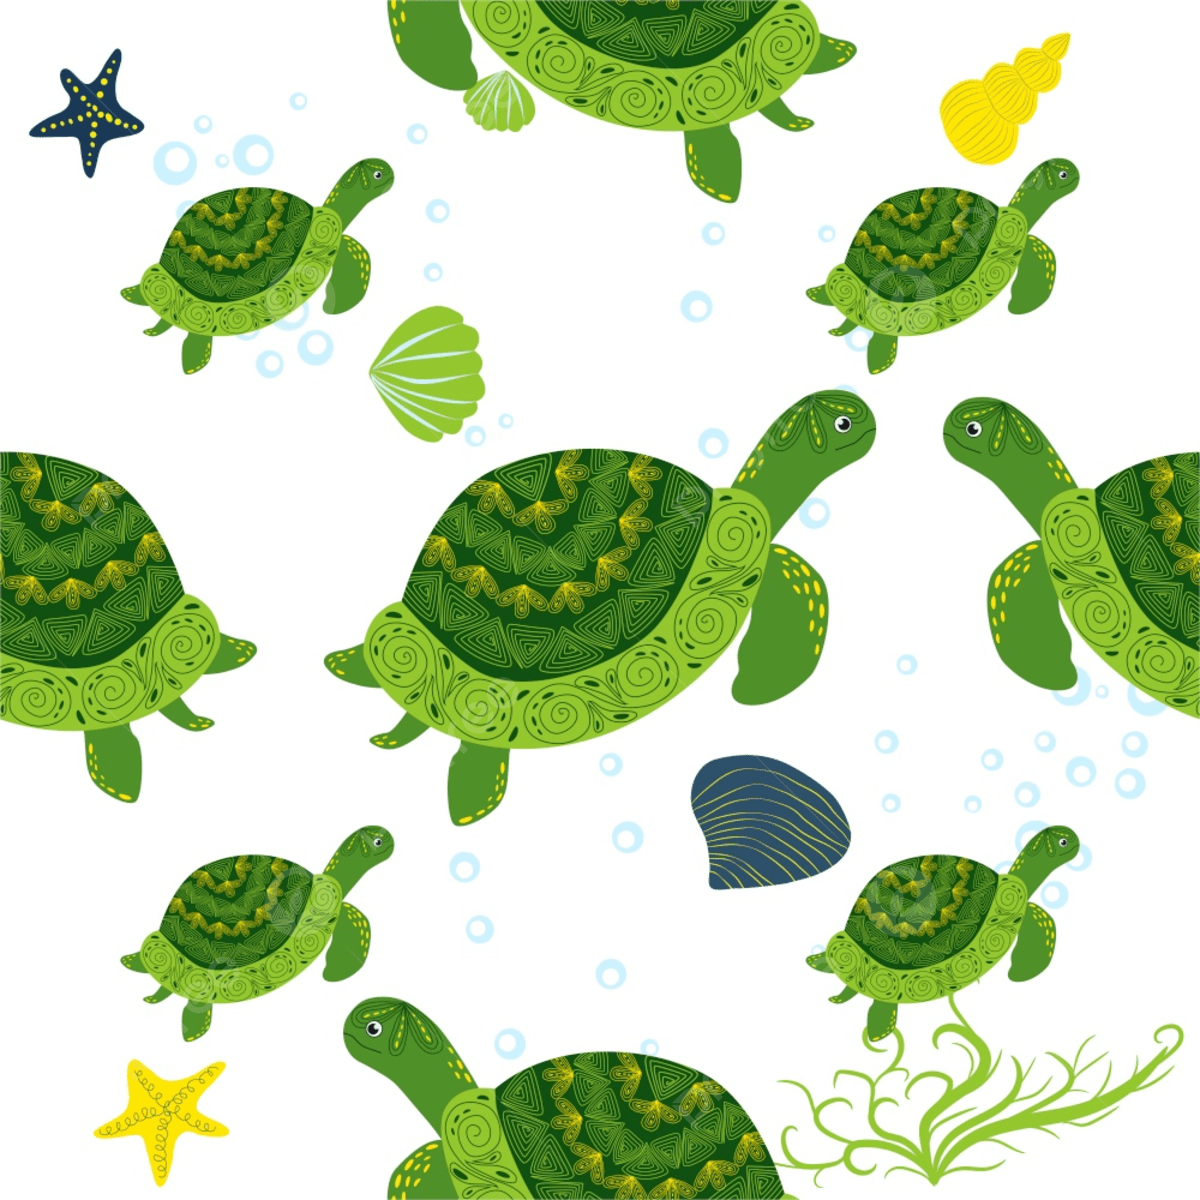 A pattern of turtles and shells - Turtle